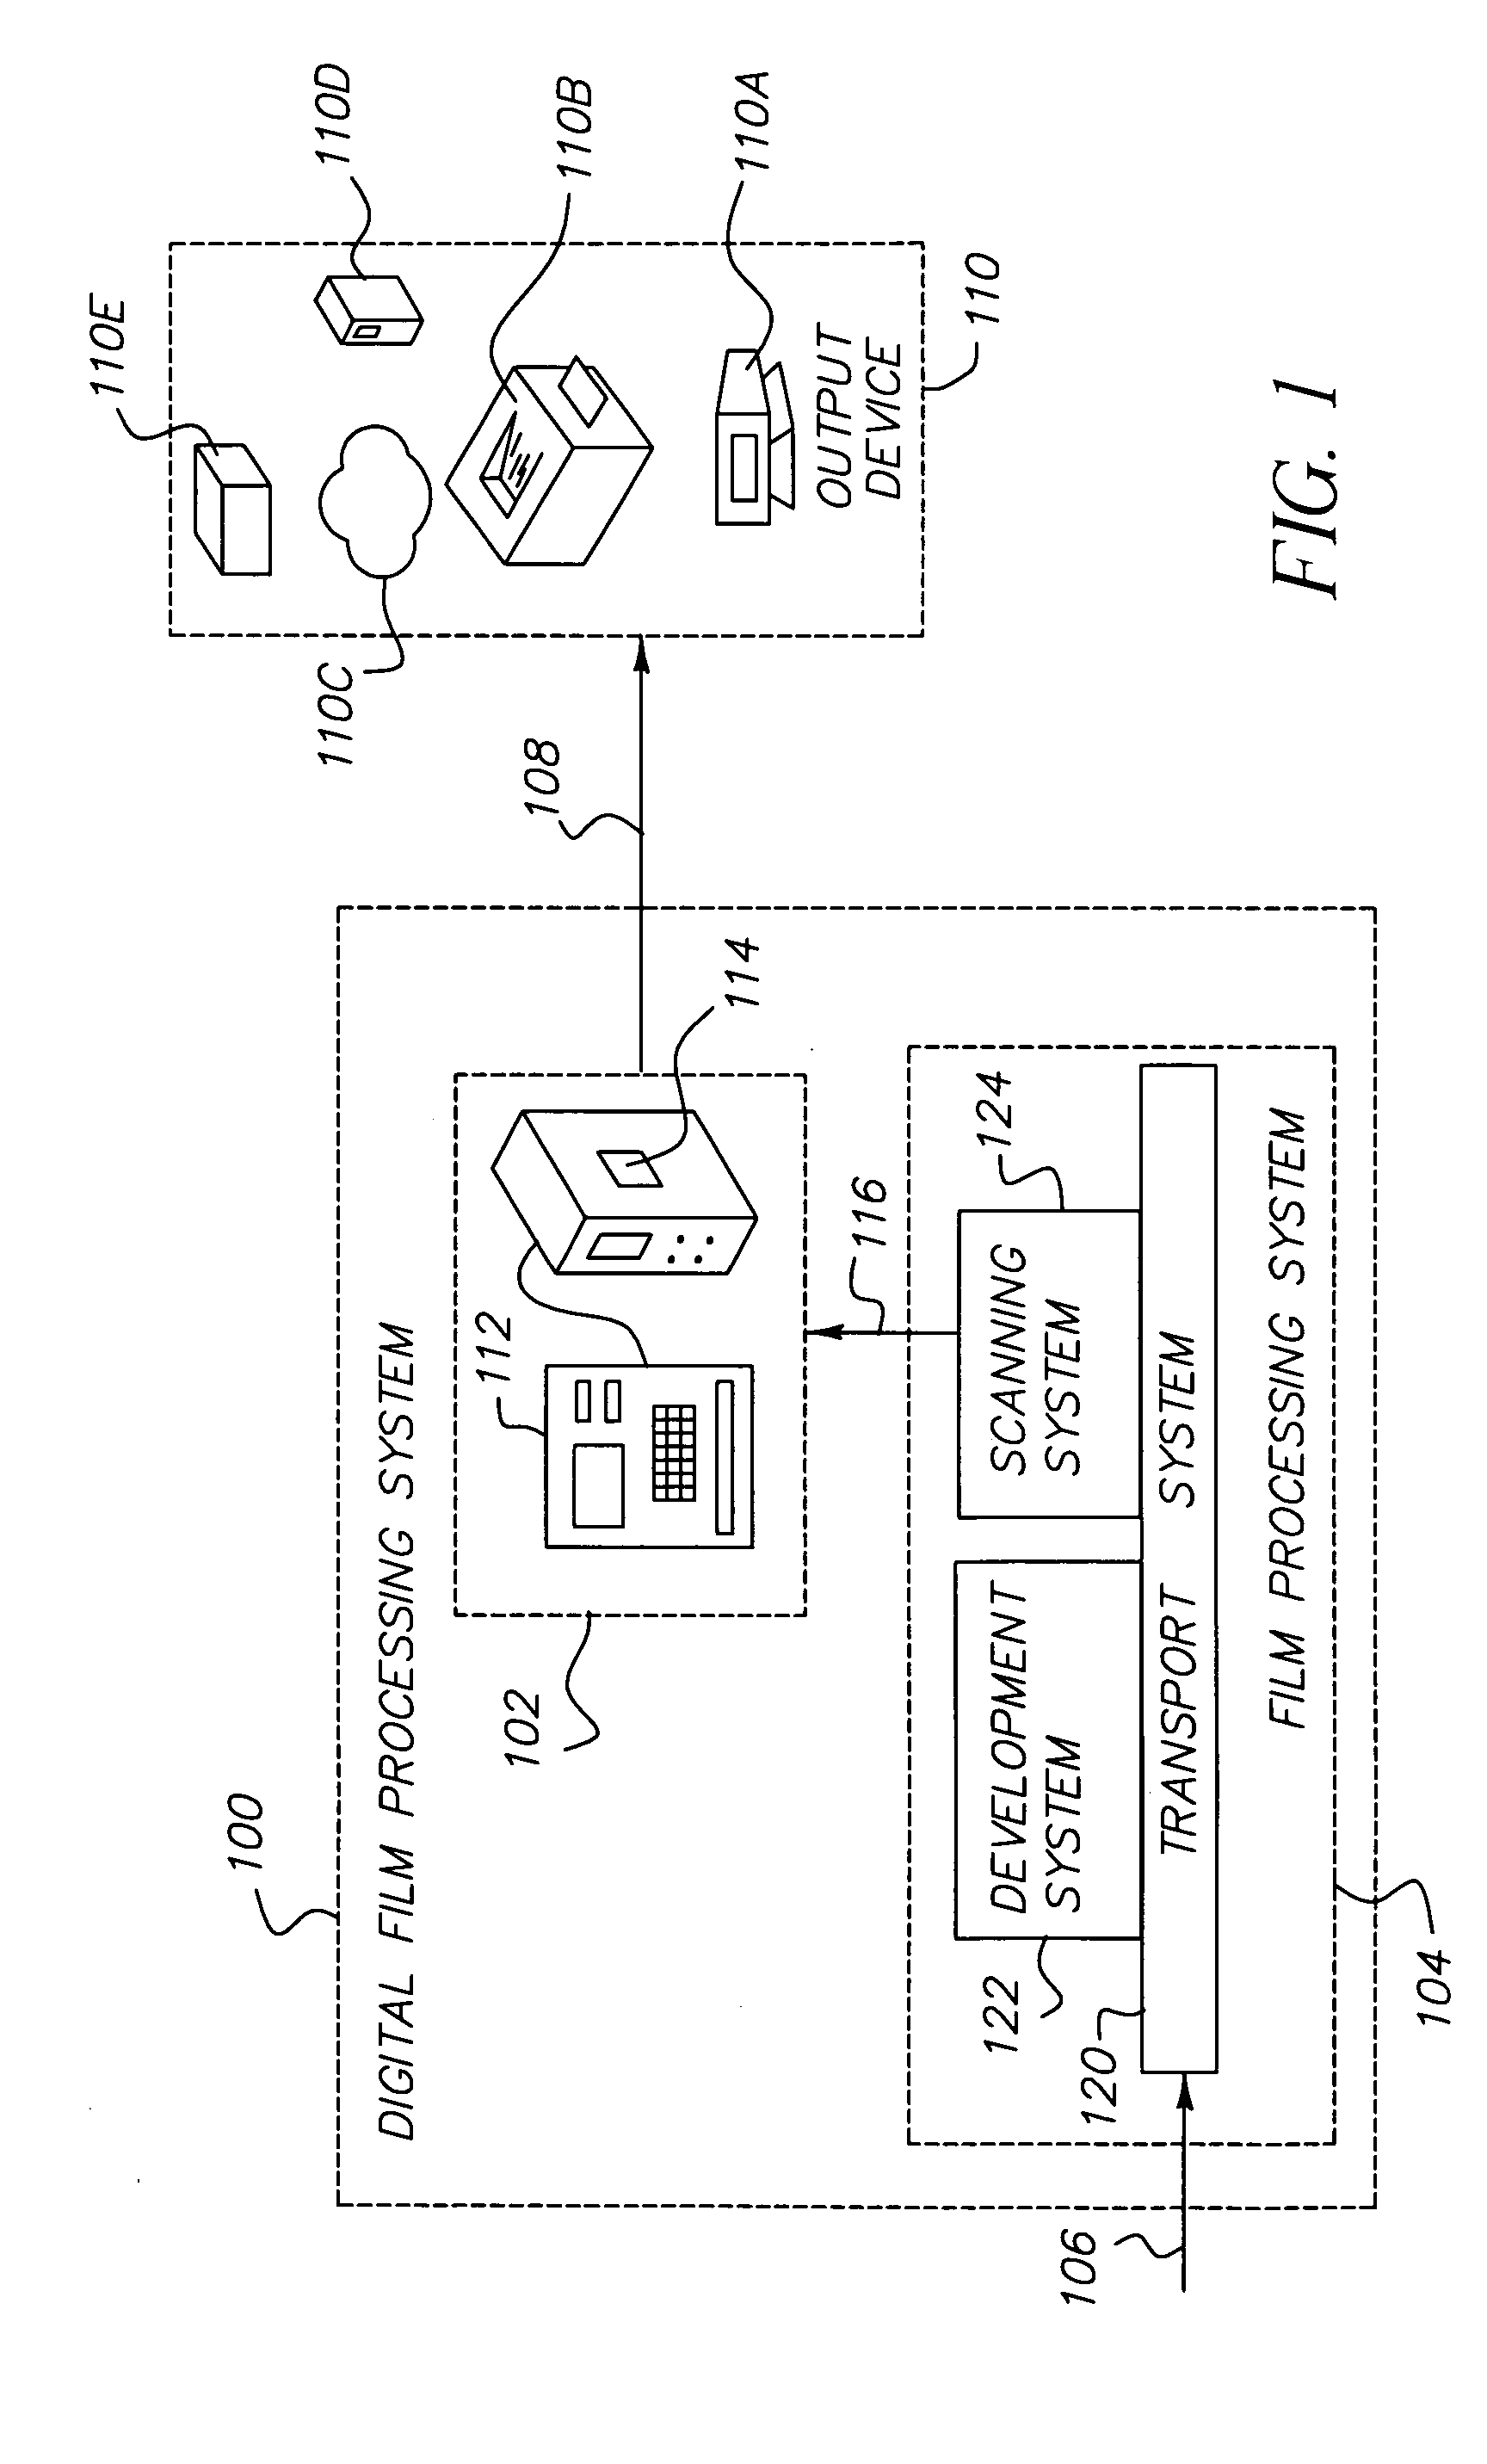 Maintenance cartridge or device for a film developing system field of the invention